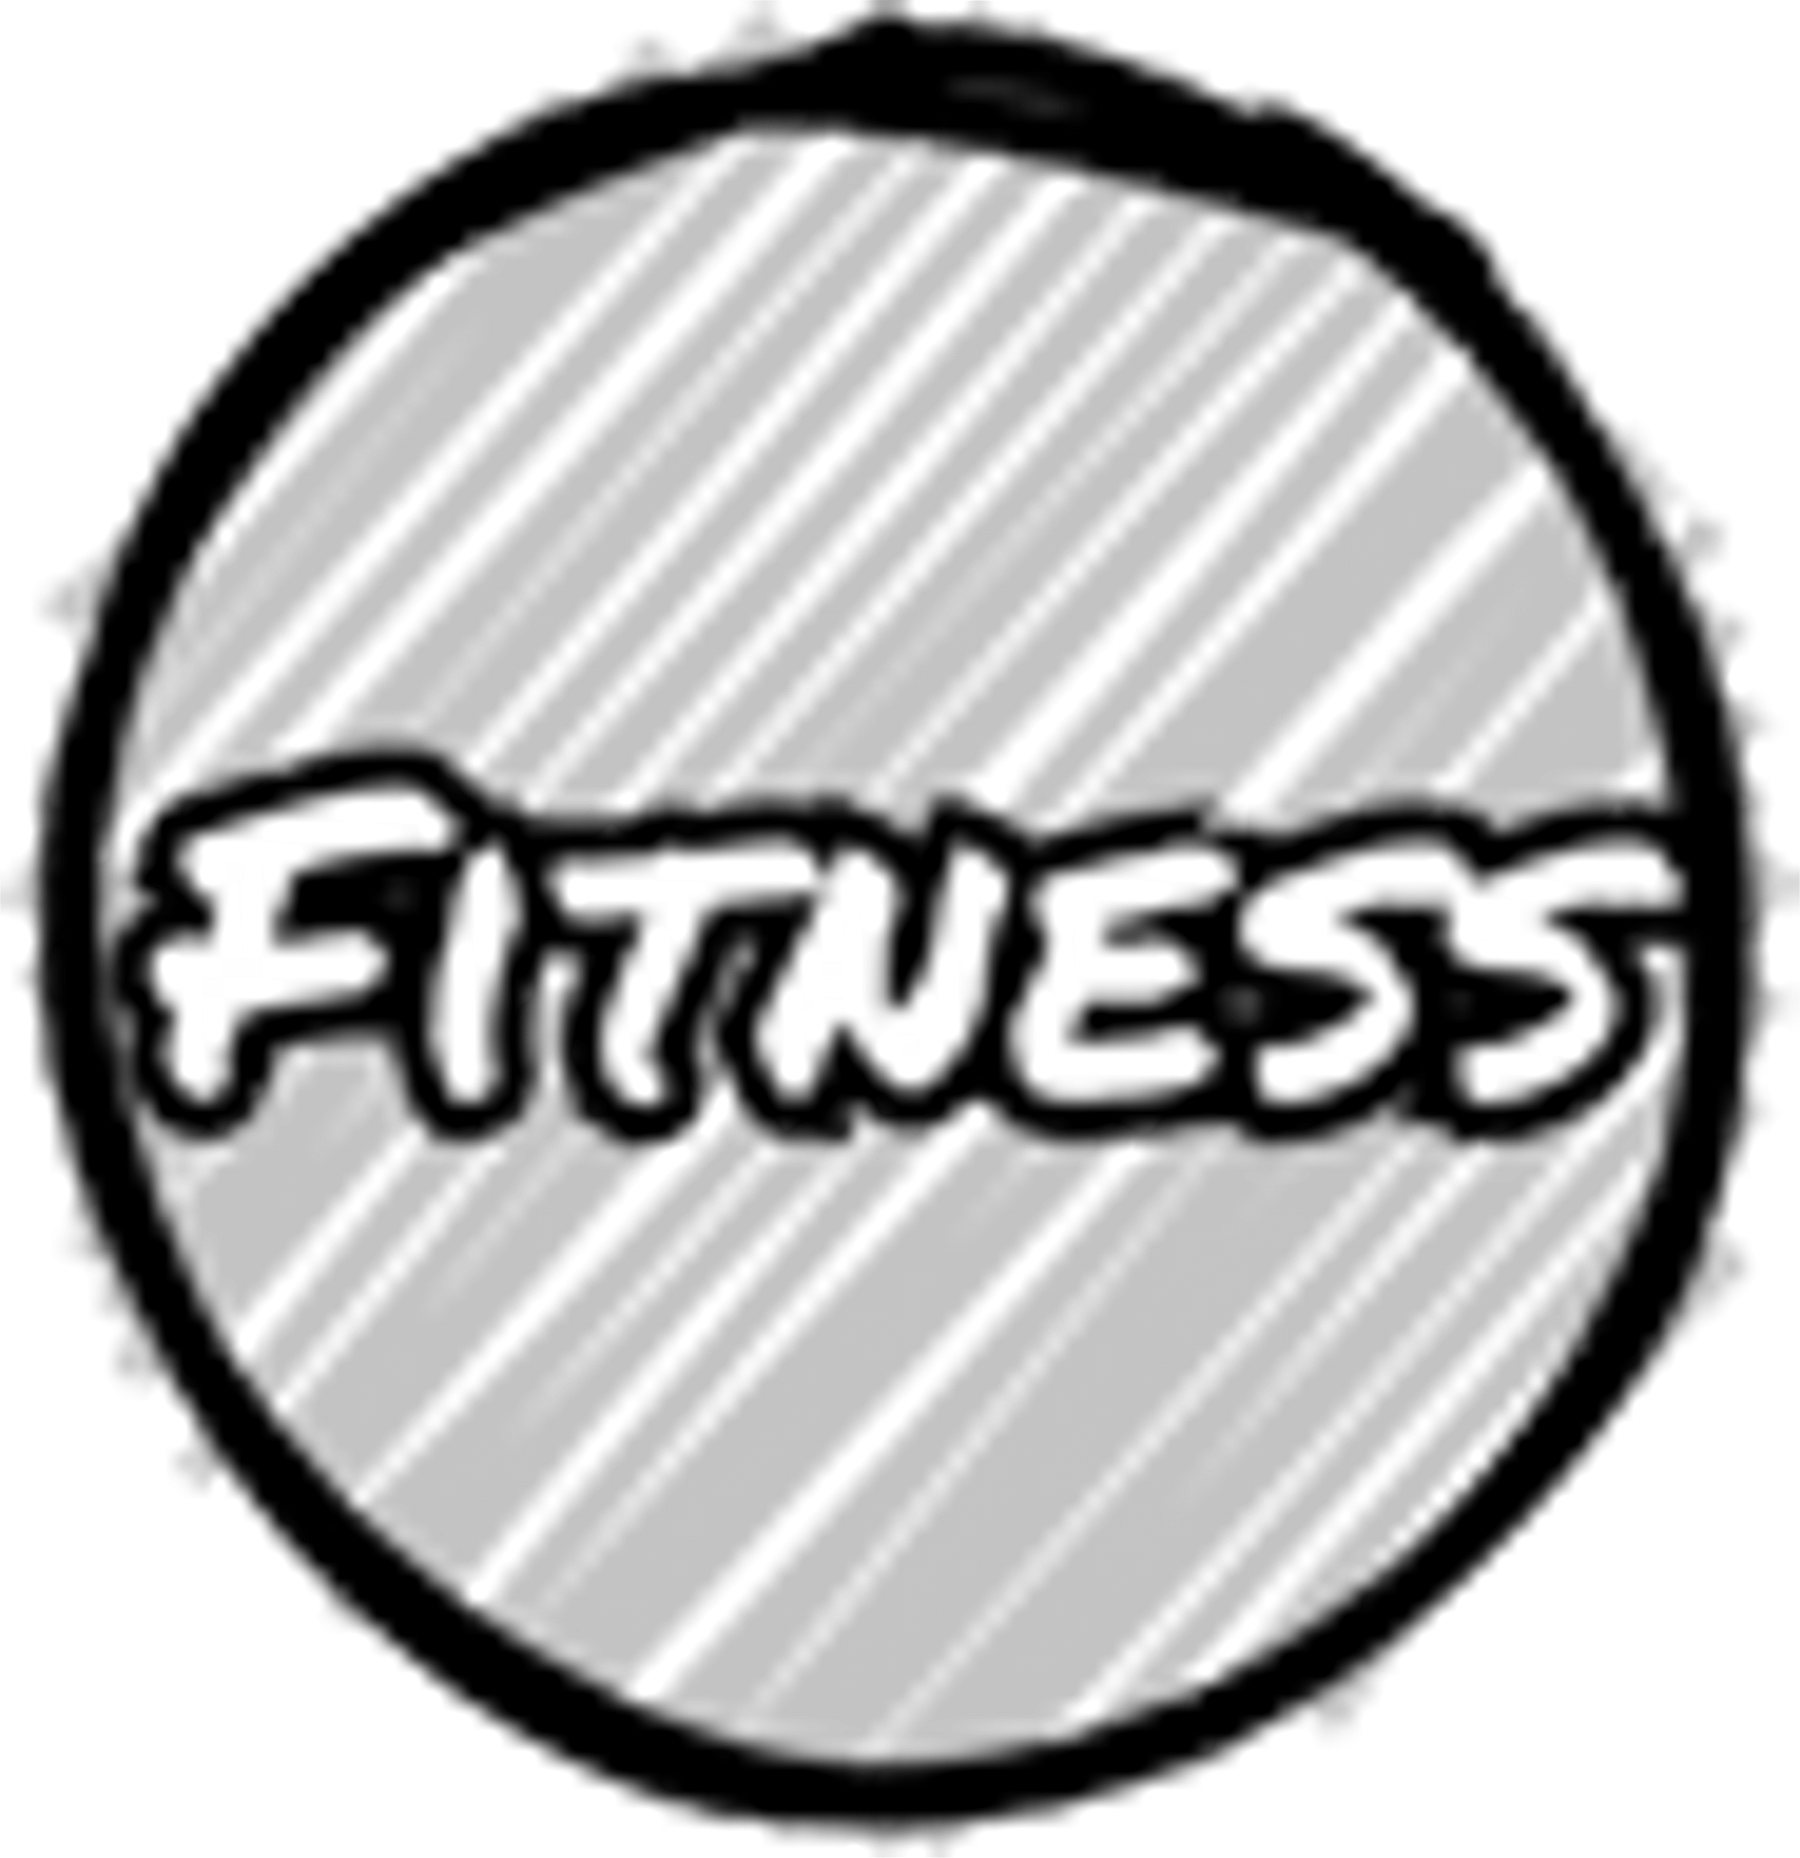 Fitness | a blog about fitness by John Guerra